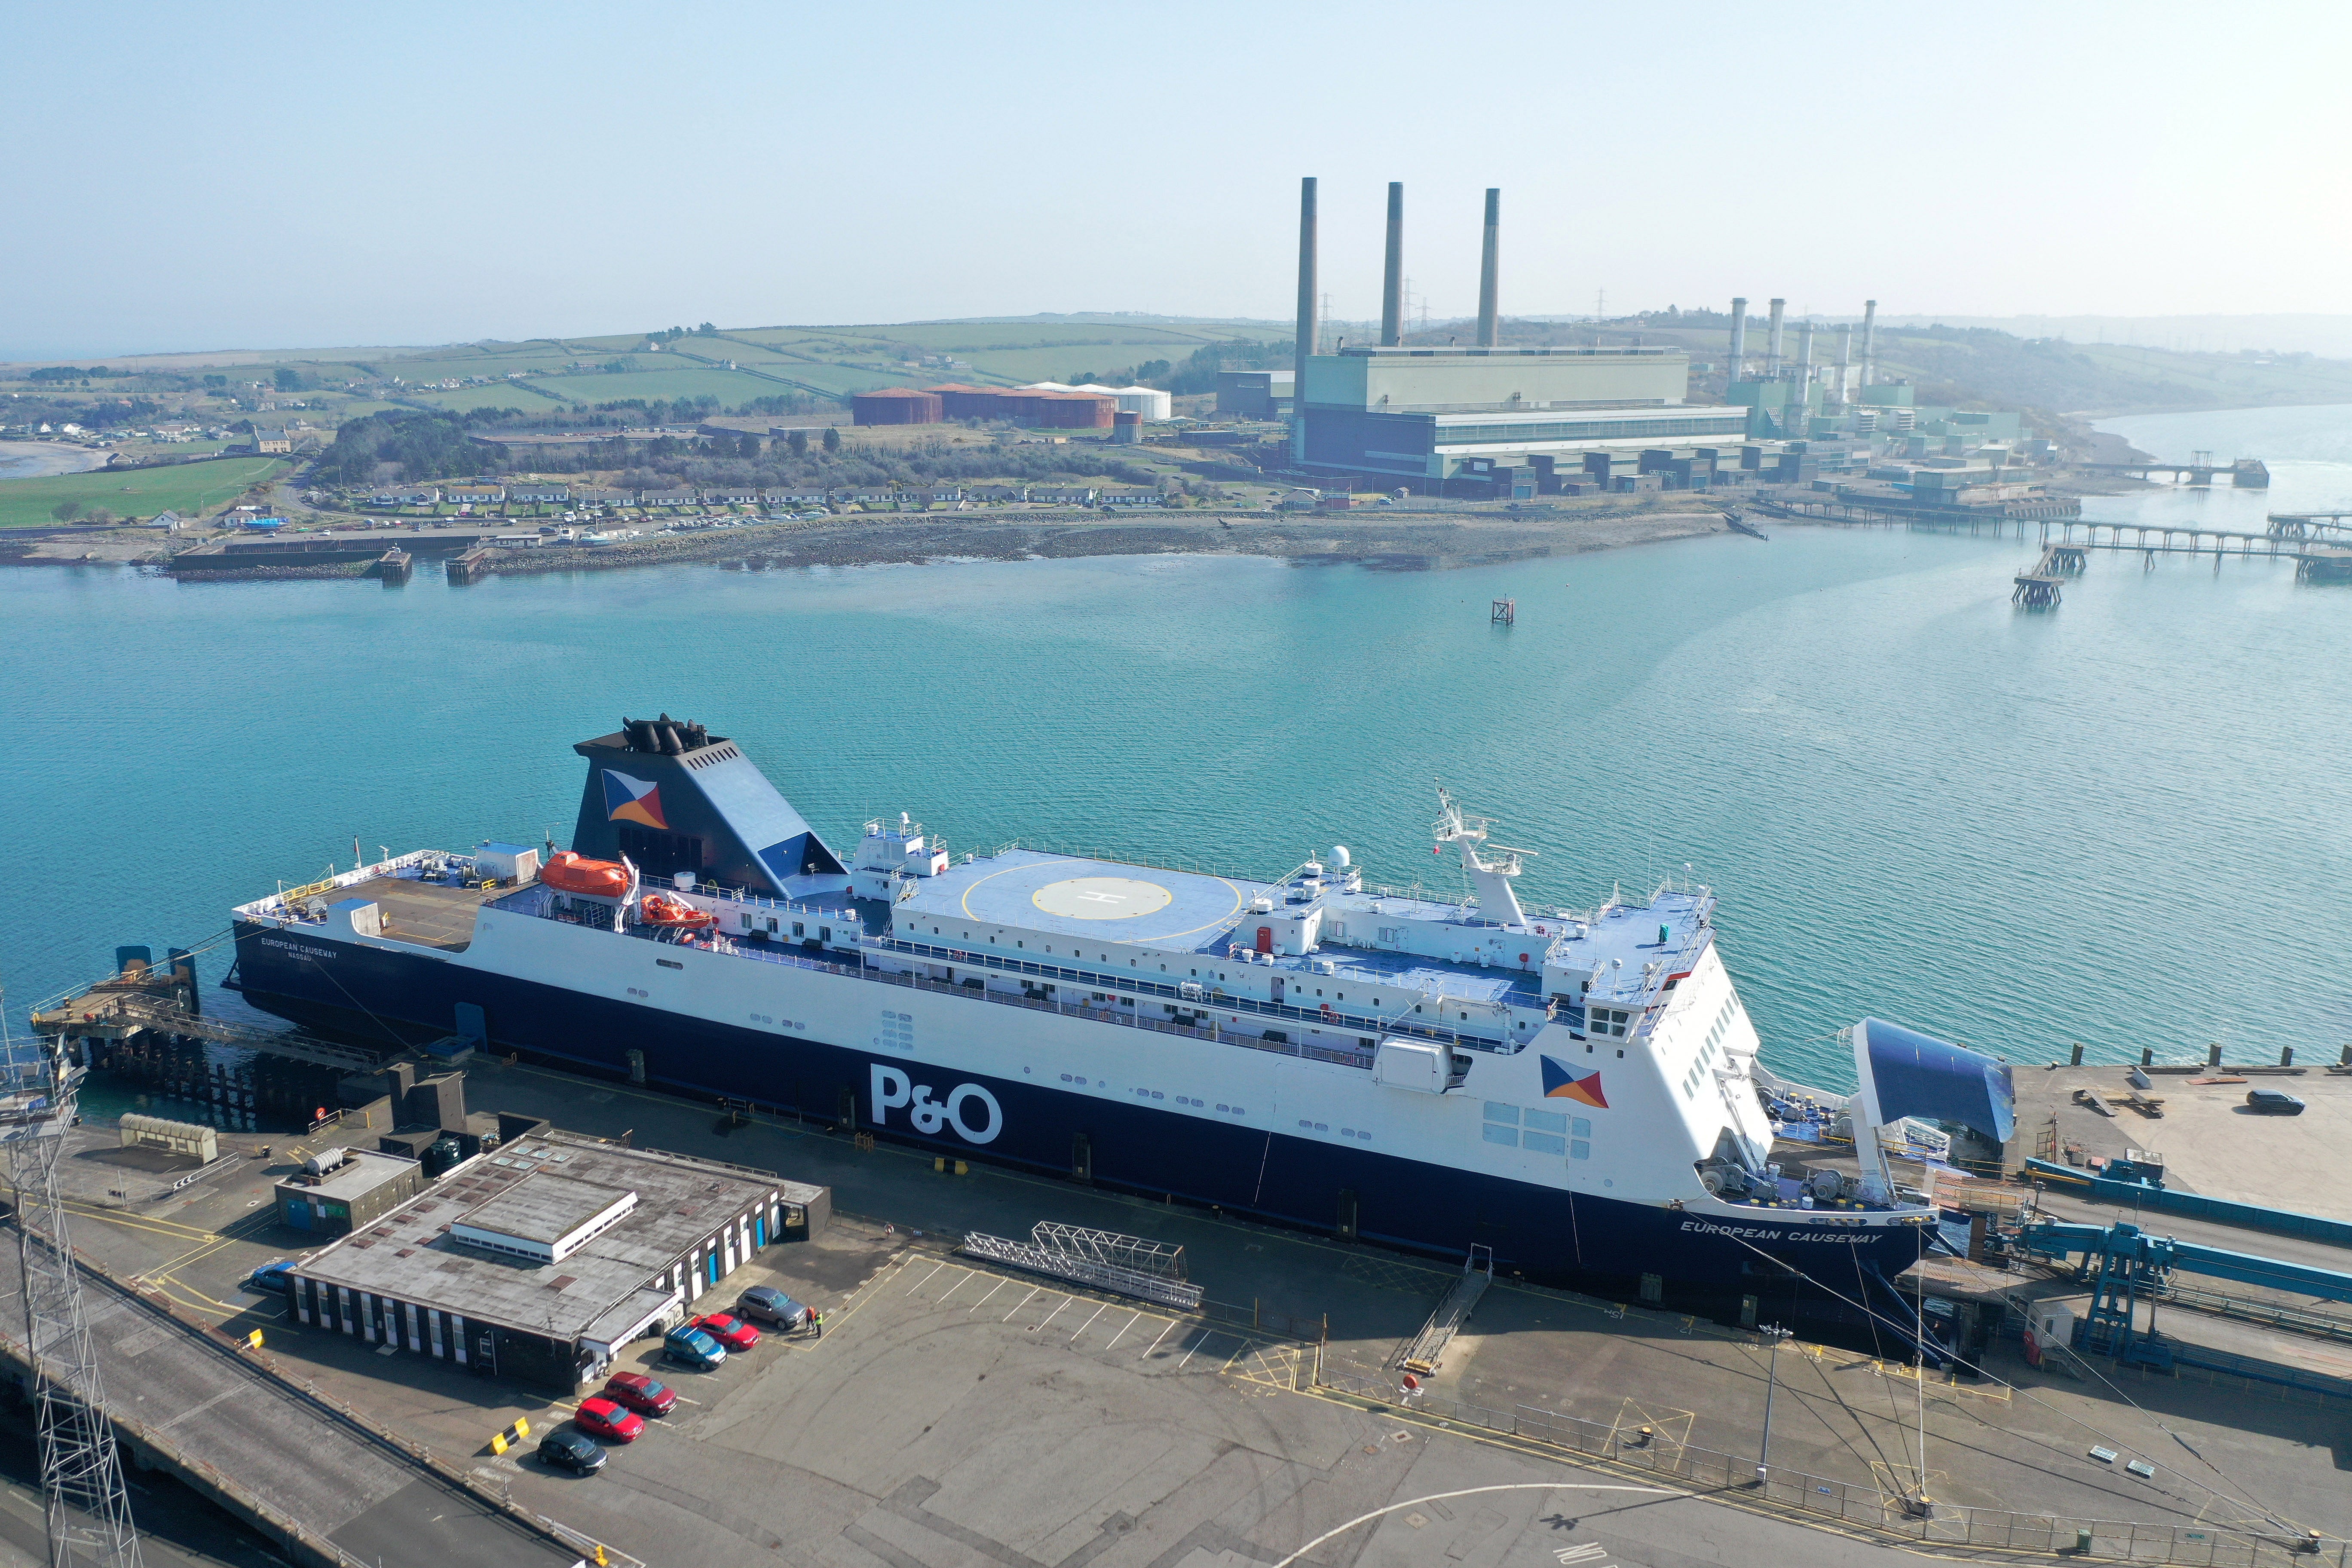 In port: The P&O Ferries ship European Causeway vessel in dock in Larne, Co Antrim, where it has been detained by authorities for being "unfit to sail"